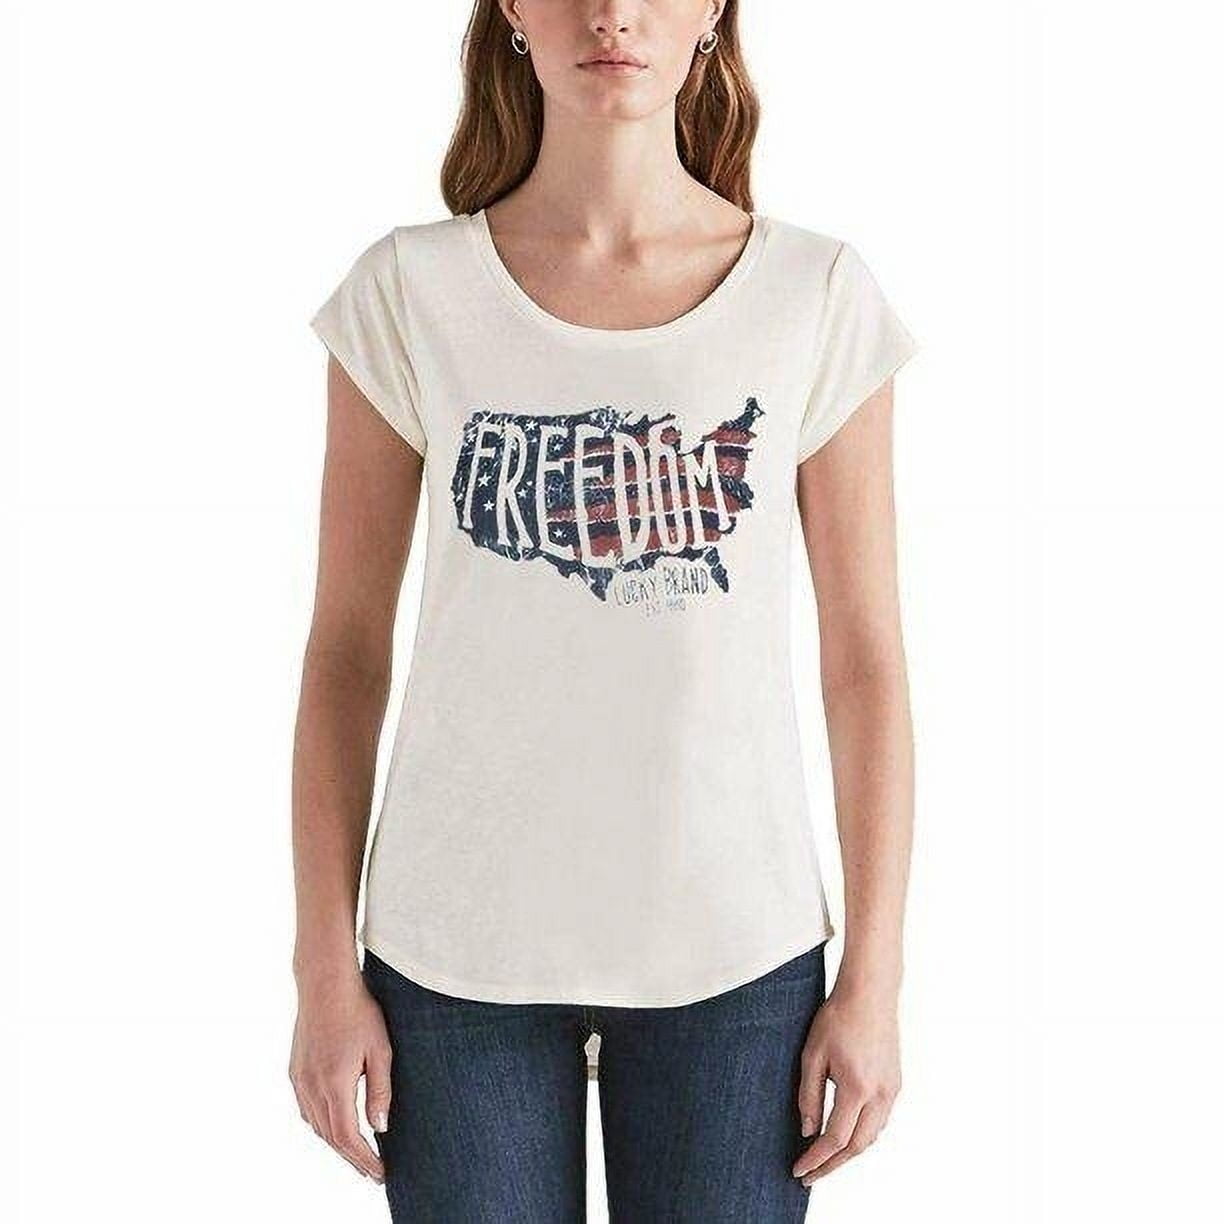 Lucky Brand Women's Graphic Tee, Freedom White, XL New with box/tags